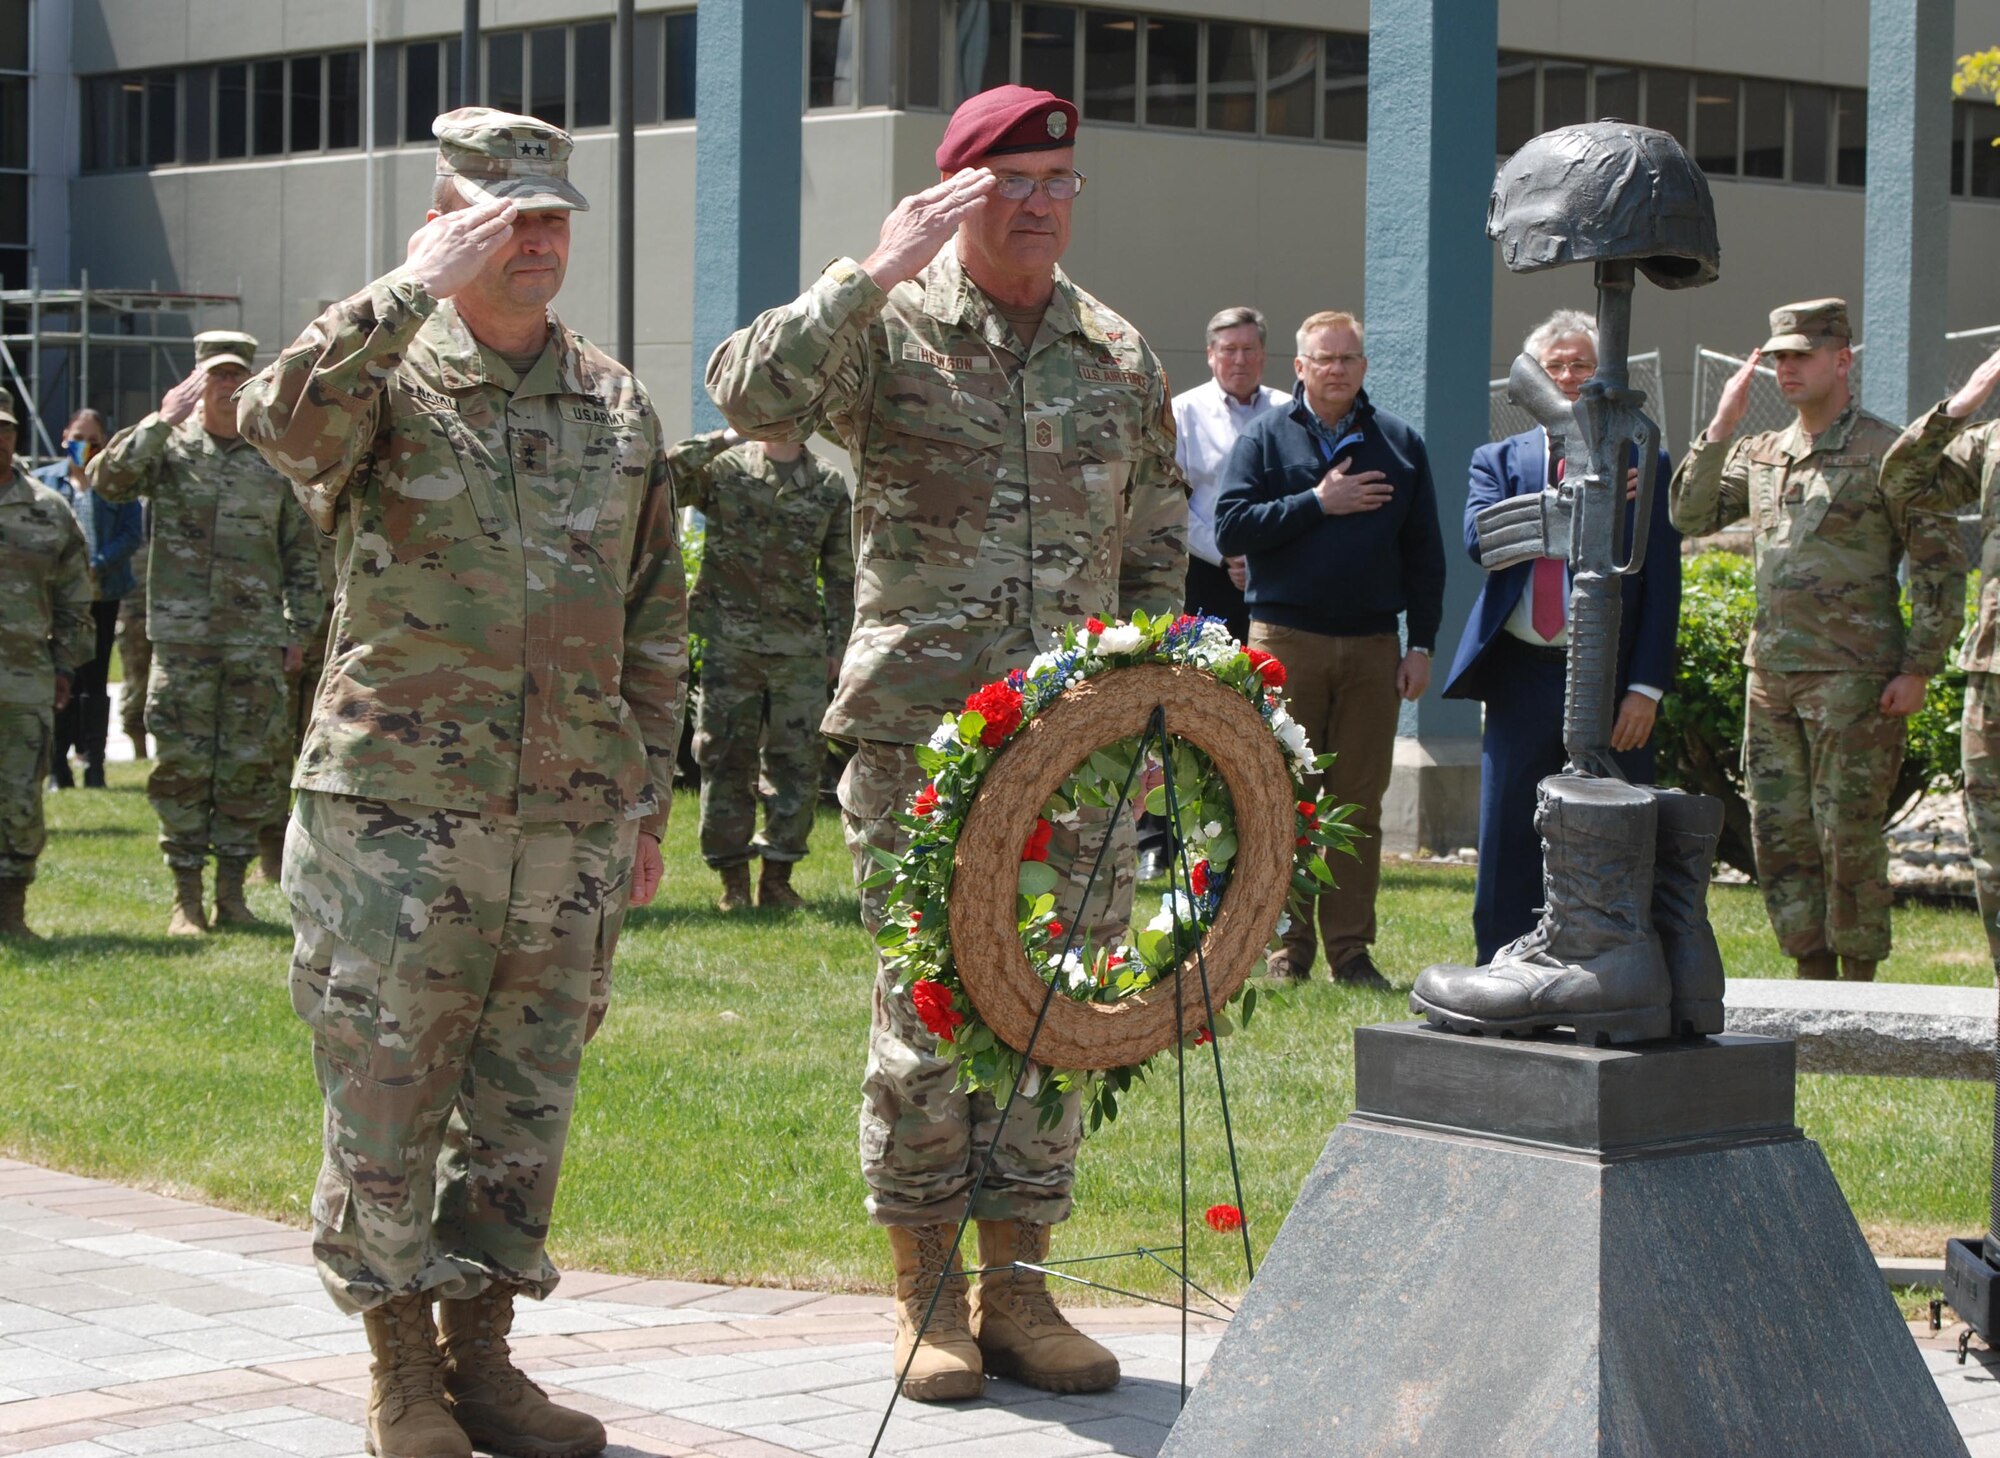 New York Army National Guard Maj. Gen. Michele Natali, left, the assistant adjutant general, Army; and New York Air National Guard Command Chief Master Sgt. Michael Hewson, the senior enlisted advisor for the New York Air National Guard, salute following the presentation of a wreath during a Memorial Day ceremony at New York National Guard headquarters in Latham, New York, May 25, 2023. The names of 12 members of the New York Military Forces and civilian employees of the New York State Division of Military and Naval Affairs who have died in the past year were also read during the ceremony.